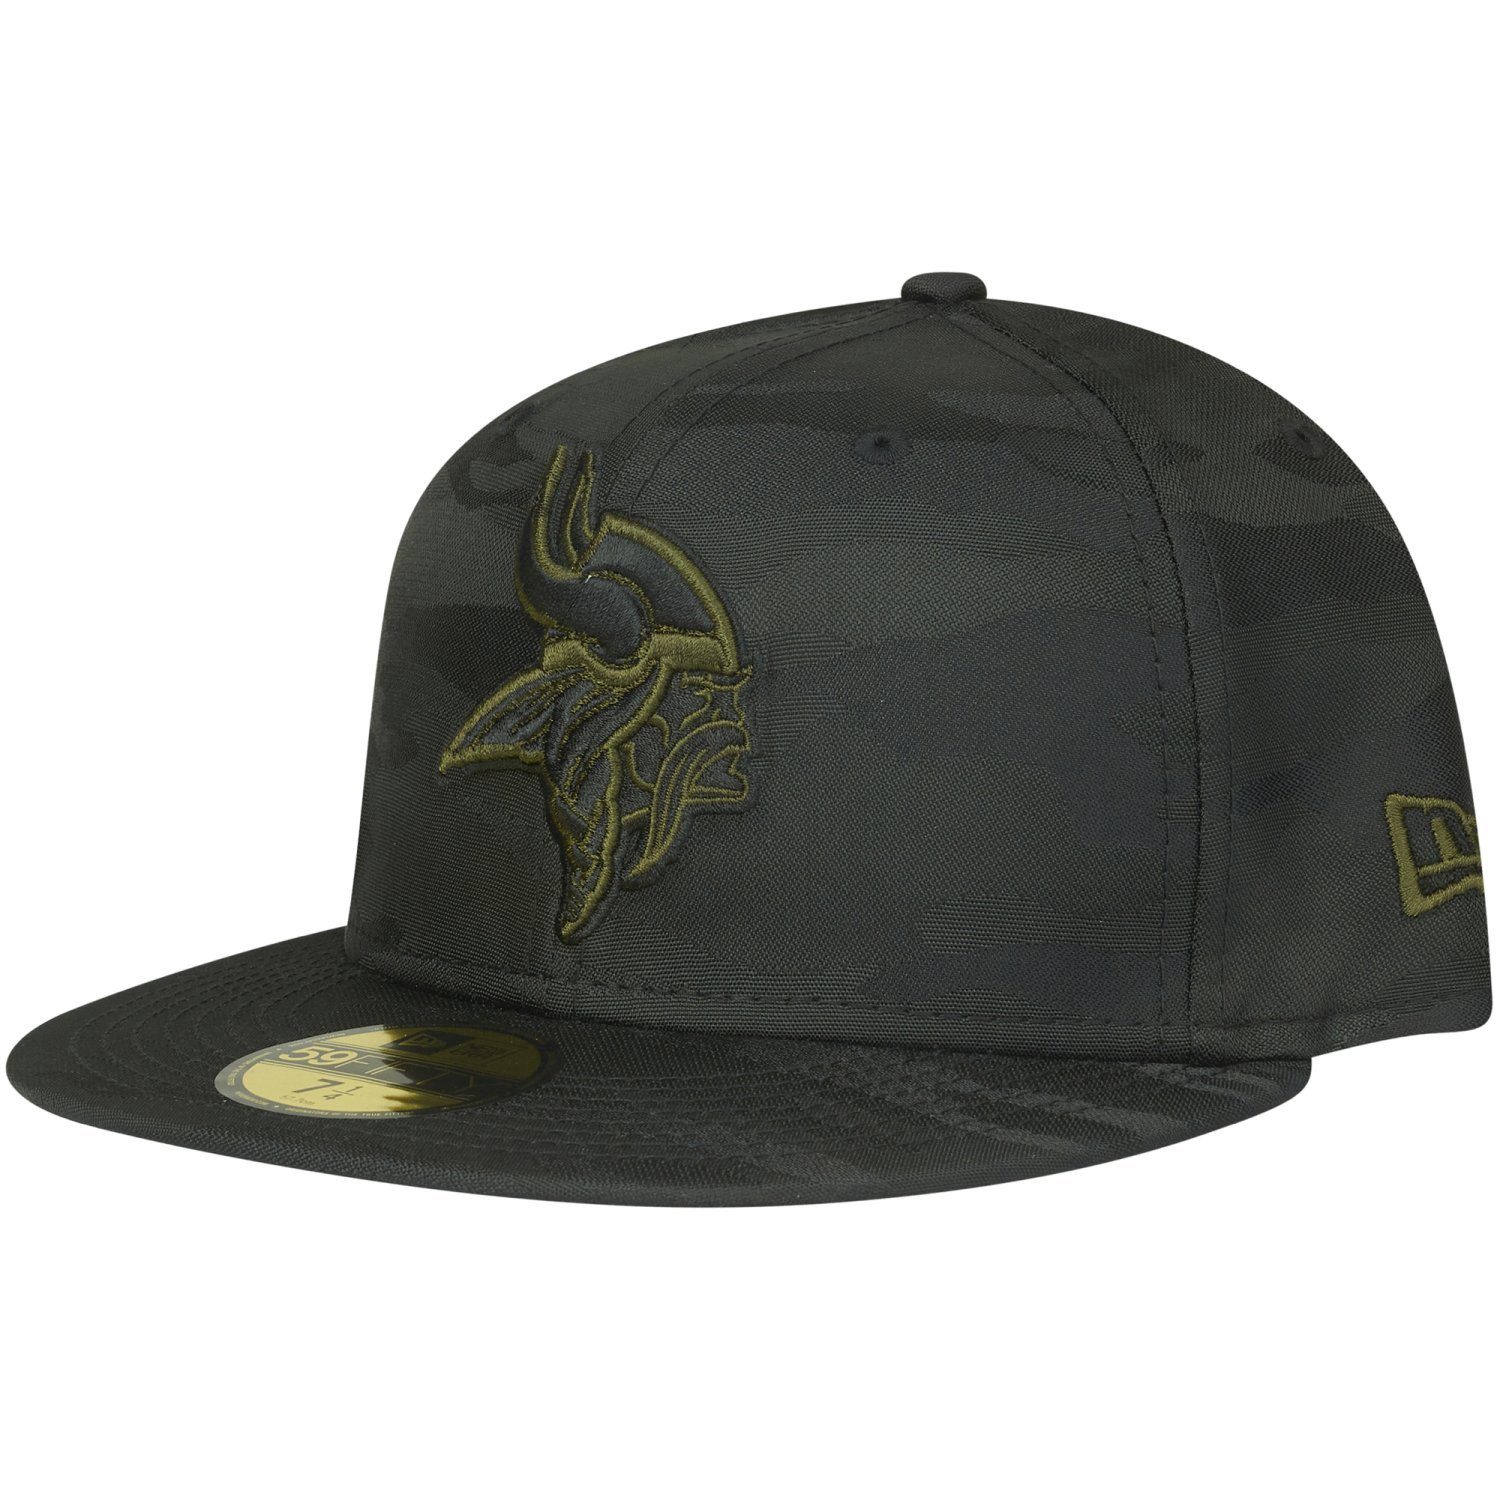 New Era Fitted Cap 59Fifty NFL TEAMS alpine Minnesota Vikings | Fitted Caps